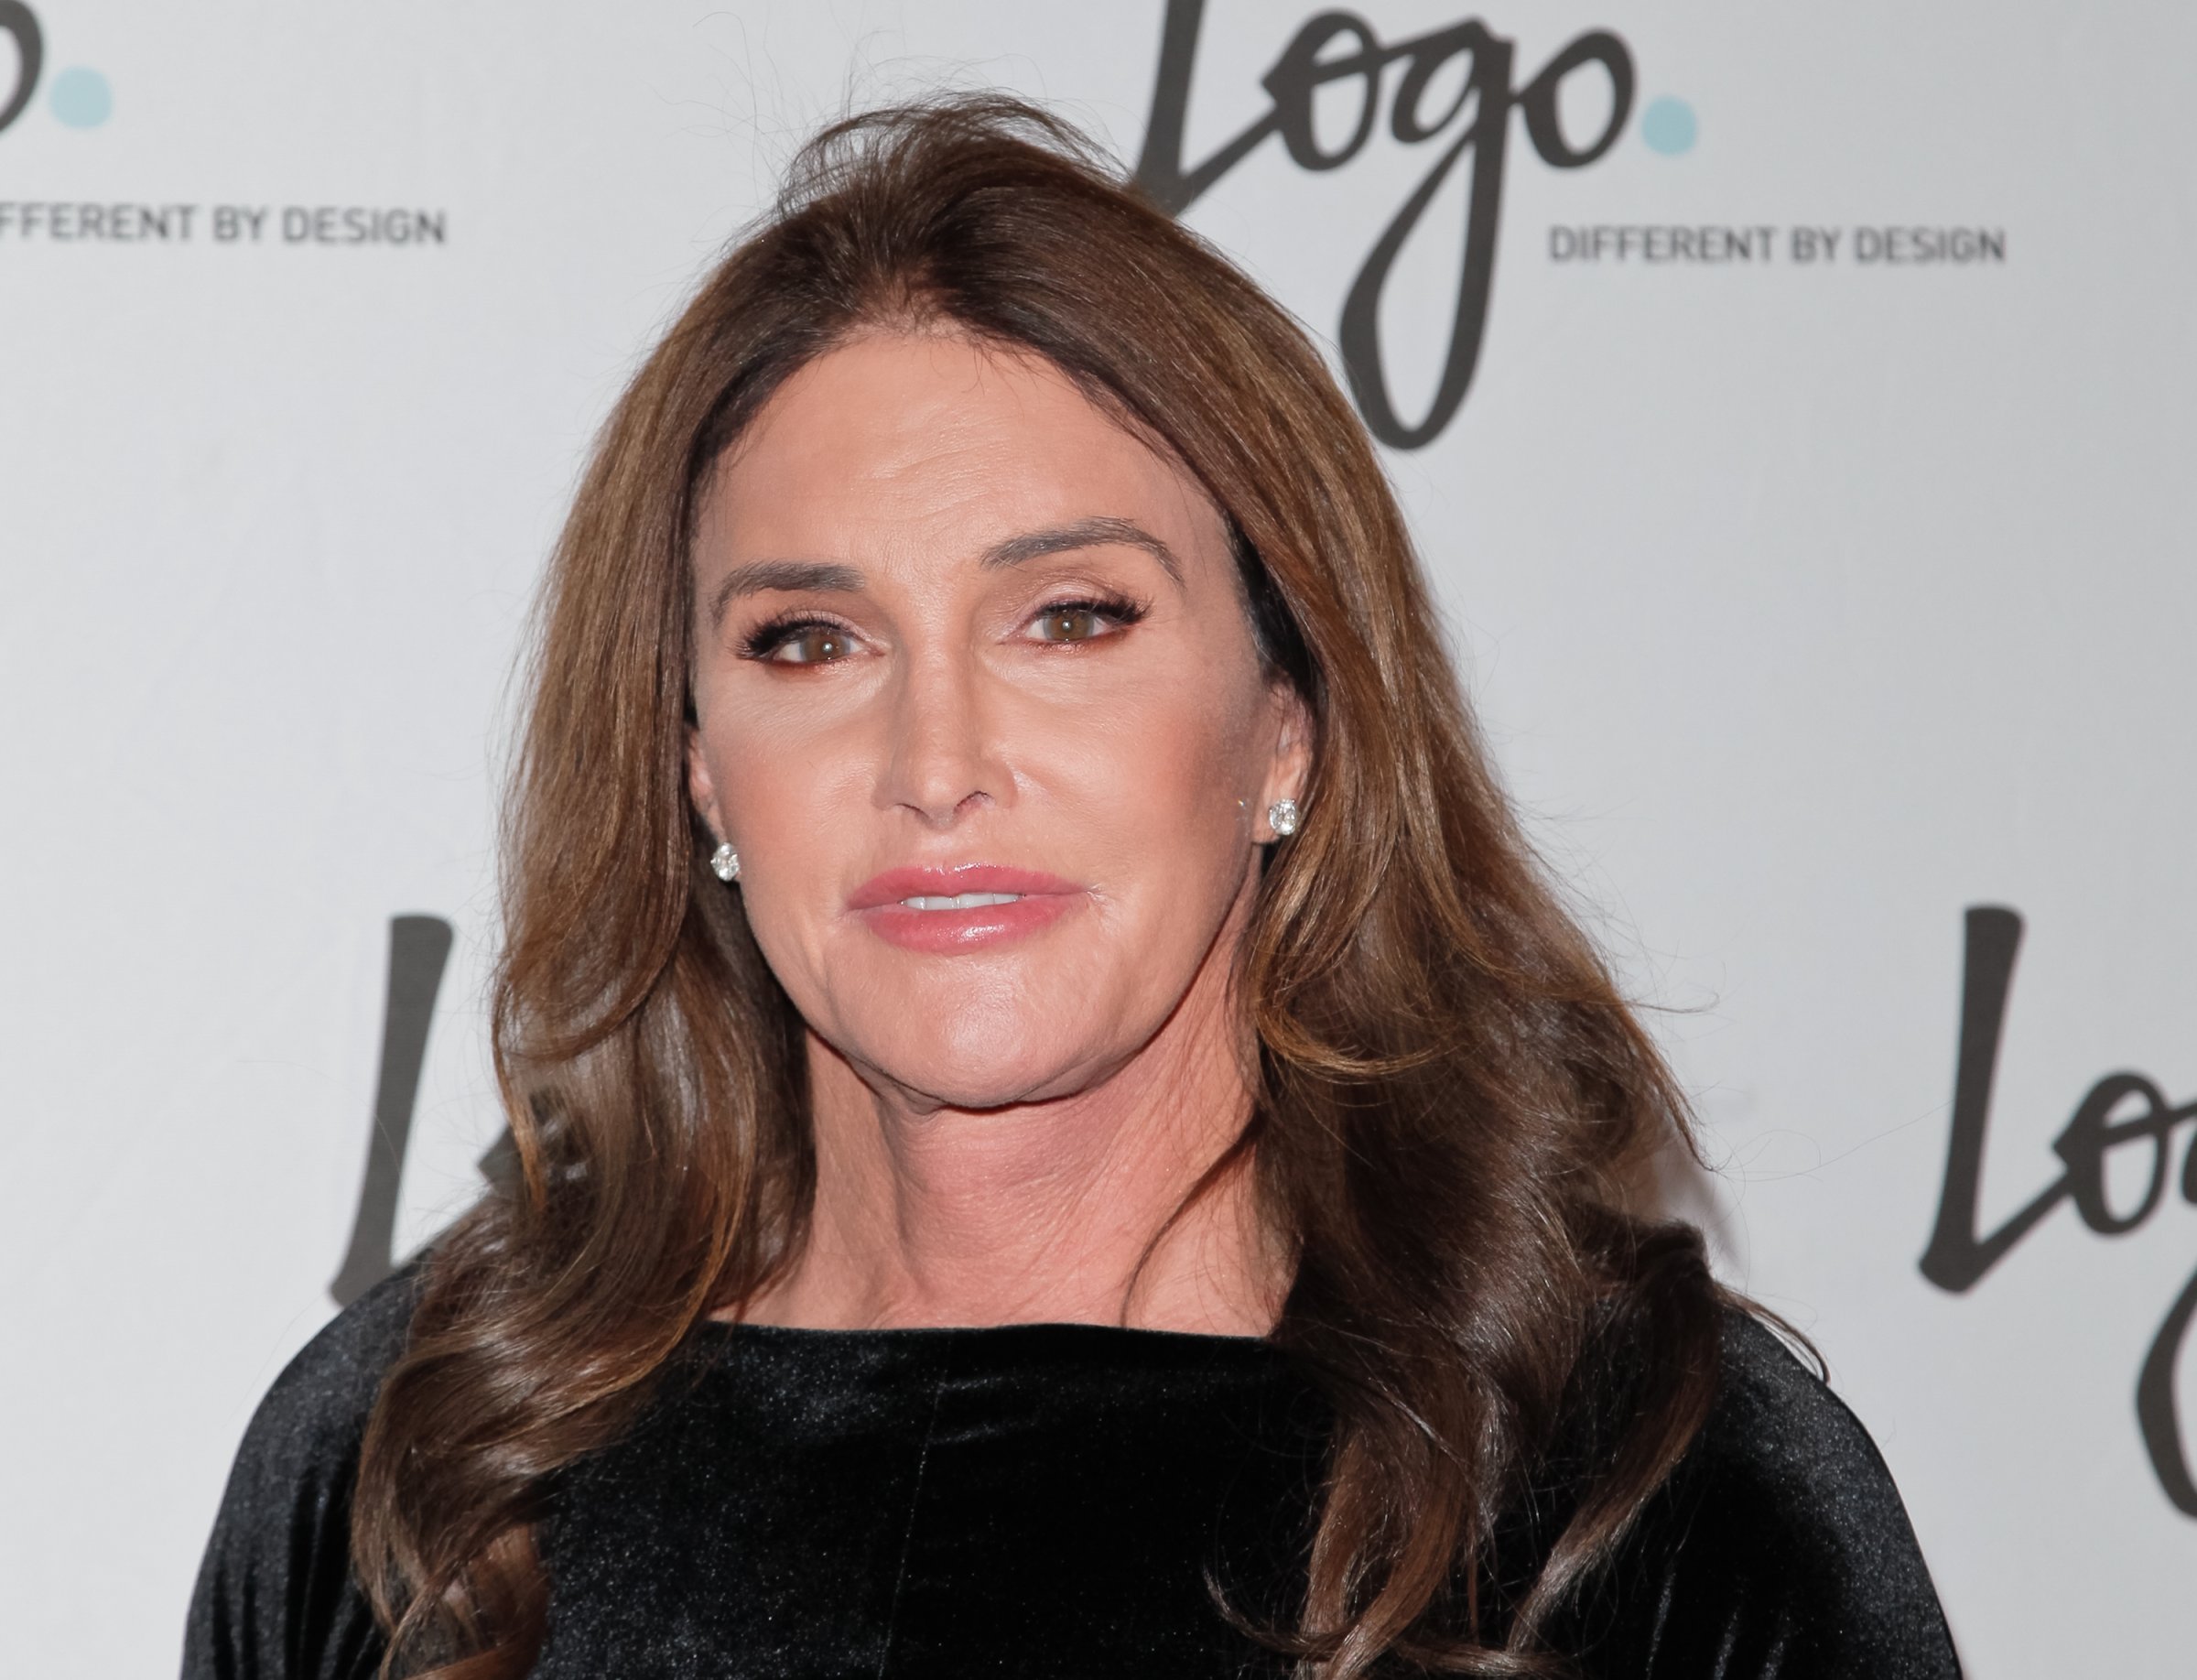 Caitlyn Jenner attends Logo TV's 'Beautiful As I Want To Be' web series launch party at The Standard Hotel on October 27, 2015 in Los Angeles, California.